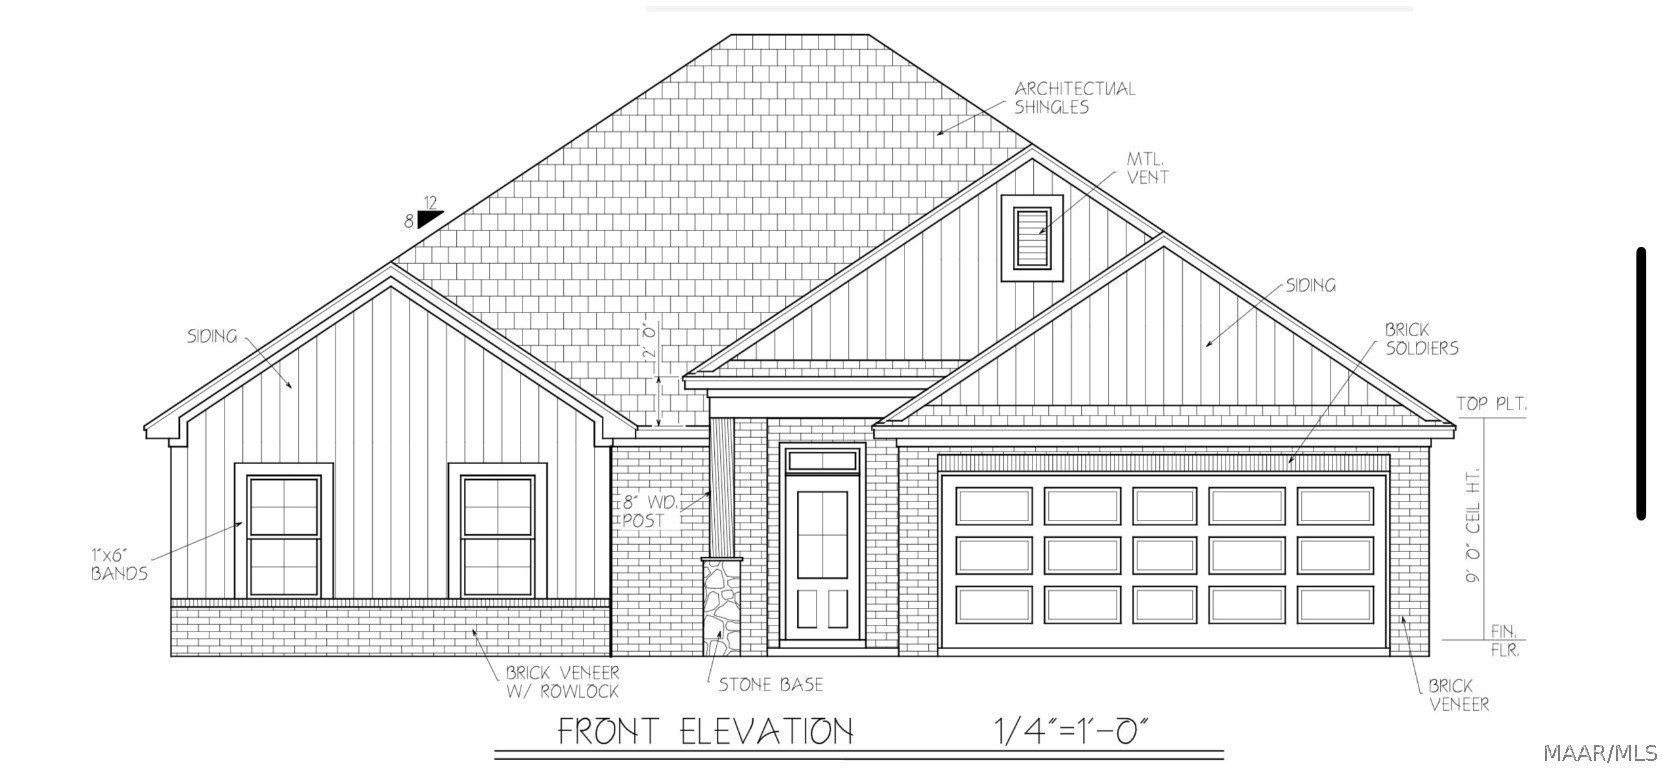 BRAND NEW CONSTRUCTION located in the Holtville School District and so close to Lake Jordan that you can see it!!! This home is in the newly developed New Lake Crossing subdivision and sits on a large beautiful flat lot that is 1.43 acres and has the perfect covered back porch with outdoor fireplace! The 3 bed/2bath home features an open floorplan with the kitchen open to the living room and dining area with lots of windows for natural light. The kitchen features a large island, custom cabinets, granite/quartz countertops, stainless steel appliances, under cabinet lighting, and pantry. From the kitchen you can look out into the living room and it's large fireplace and mantle, smooth ceilings, and recessed lighting. The master bedroom will easily accommodate a king size bed and your master bath has plenty of space with a large double sink vanity, separate tub and large walk-in shower, private water closet, and a HUGE walk-in closet!!! Home has an attached THREE CAR garage. Enjoy your new home even better with the energy efficiency of double pane windows, spray foam insulation, and a gas tankless water heater. Will not last long so call today.